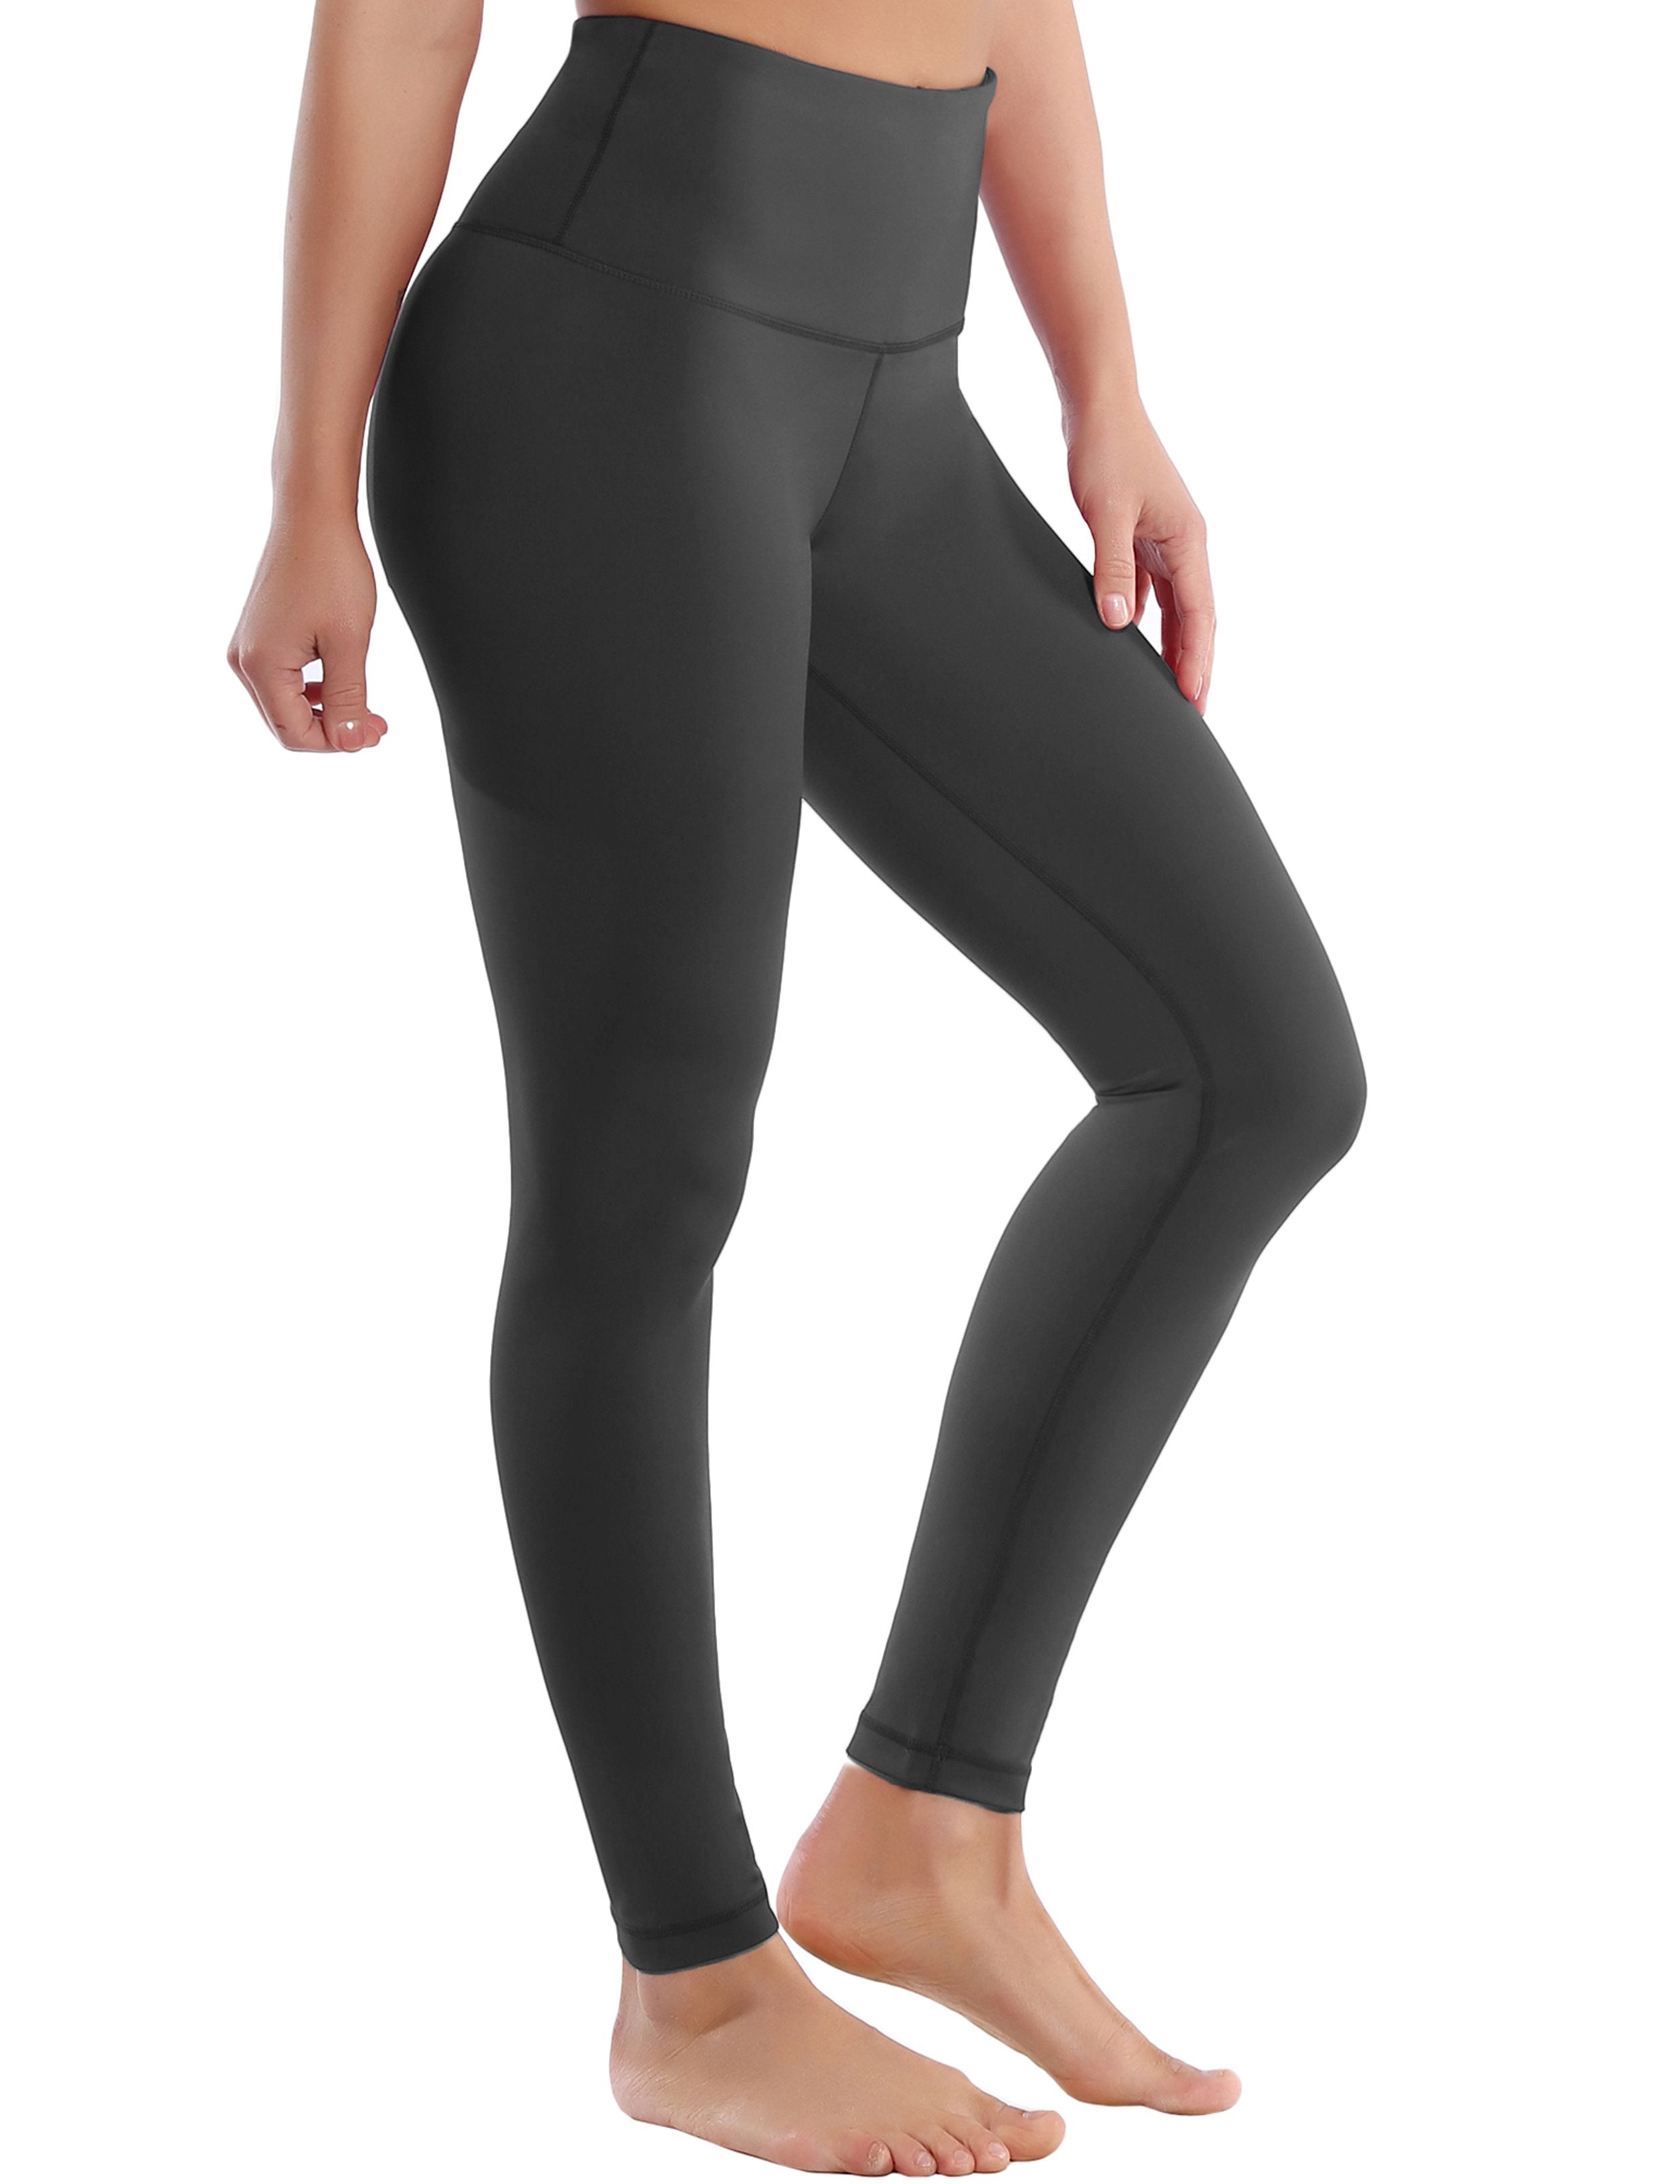 High Waist yogastudio Pants shadowcharcoal 75%Nylon/25%Spandex Fabric doesn't attract lint easily 4-way stretch No see-through Moisture-wicking Tummy control Inner pocket Four lengths